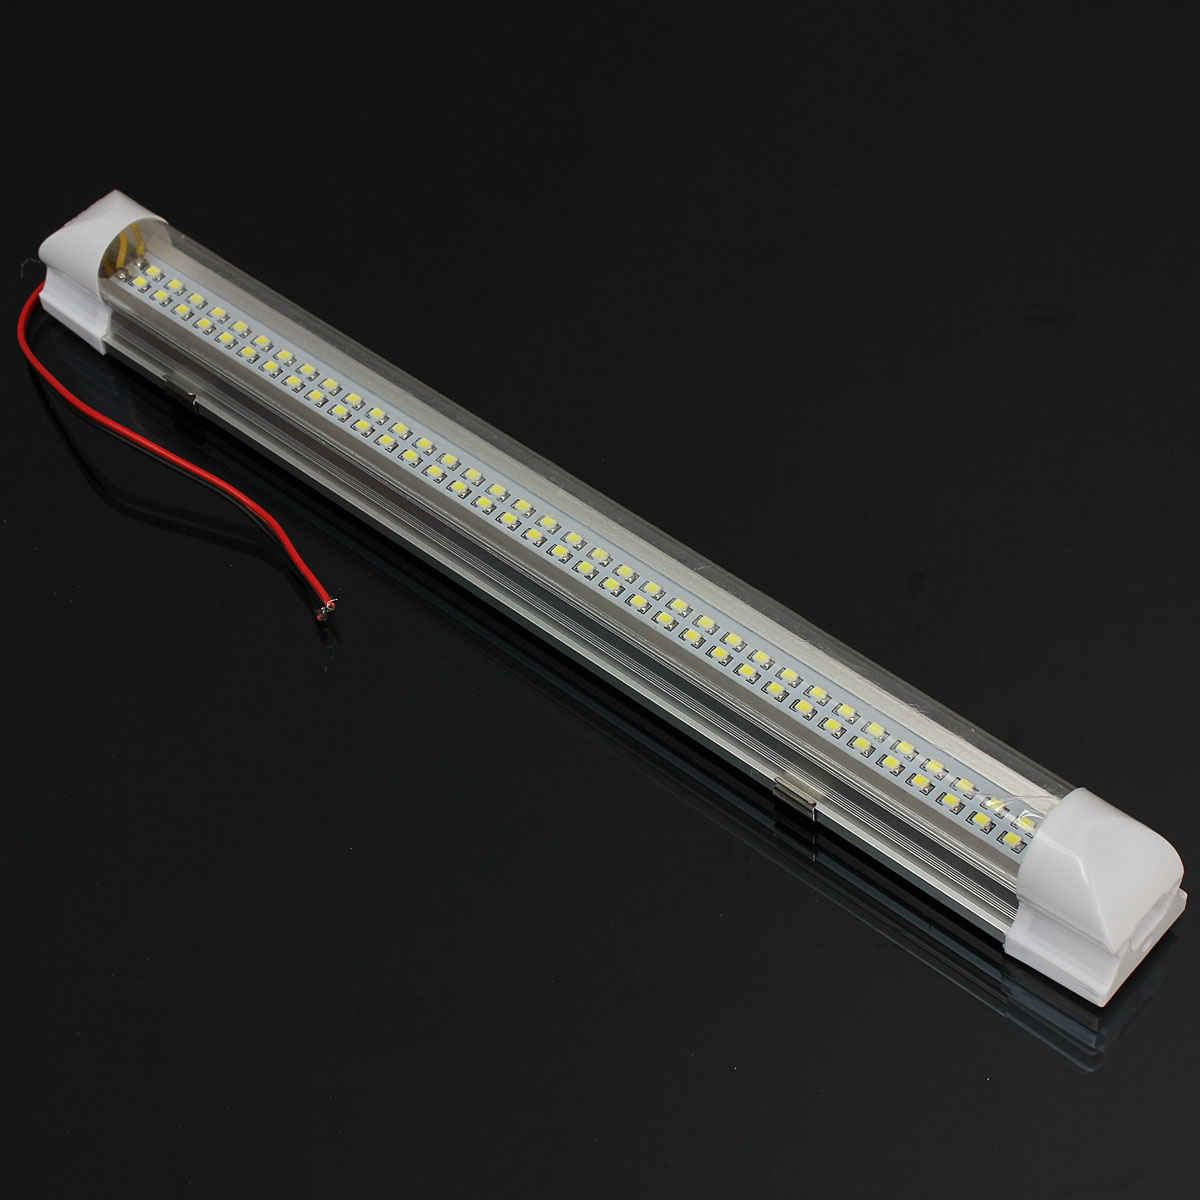 Universal-Interior-34cm-LED-Light-Strip-Lamp-White-4Pcs-with-ONOFF-Switch-for-Car-Auto-Caravan-Bus-1406613